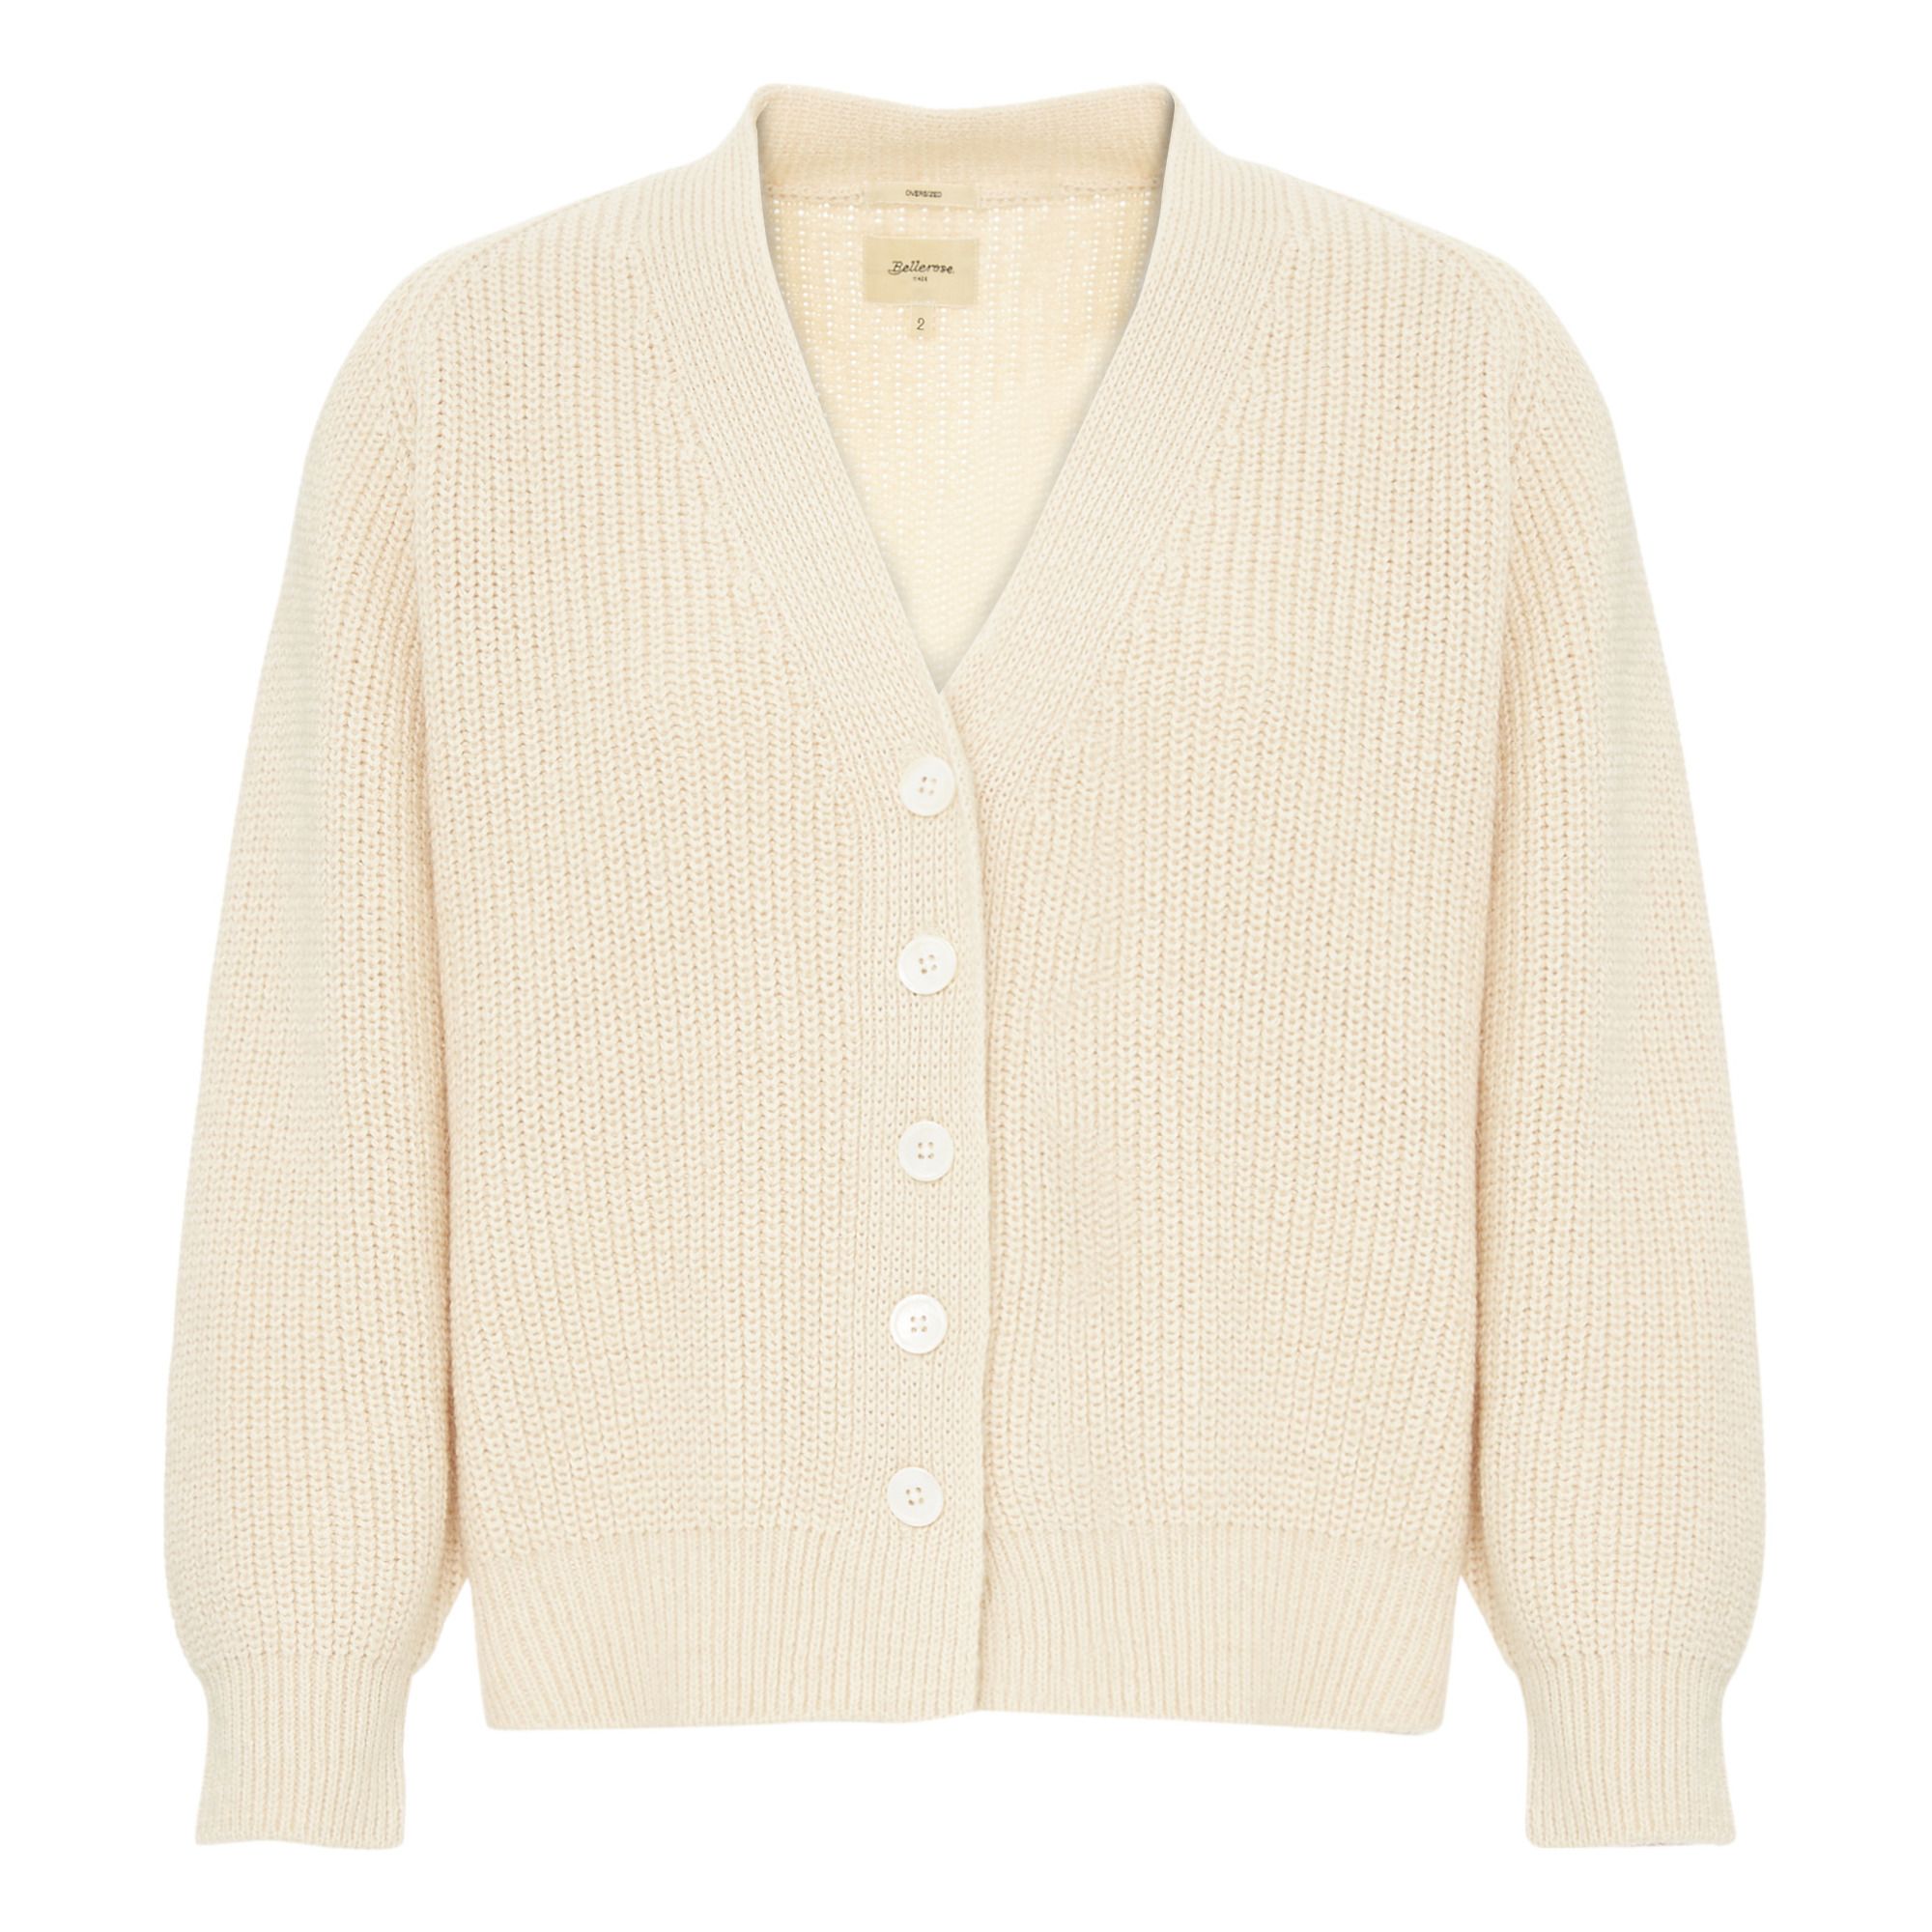 Dosany Wool and Mohair Cardigan - Women's Collection - Beige